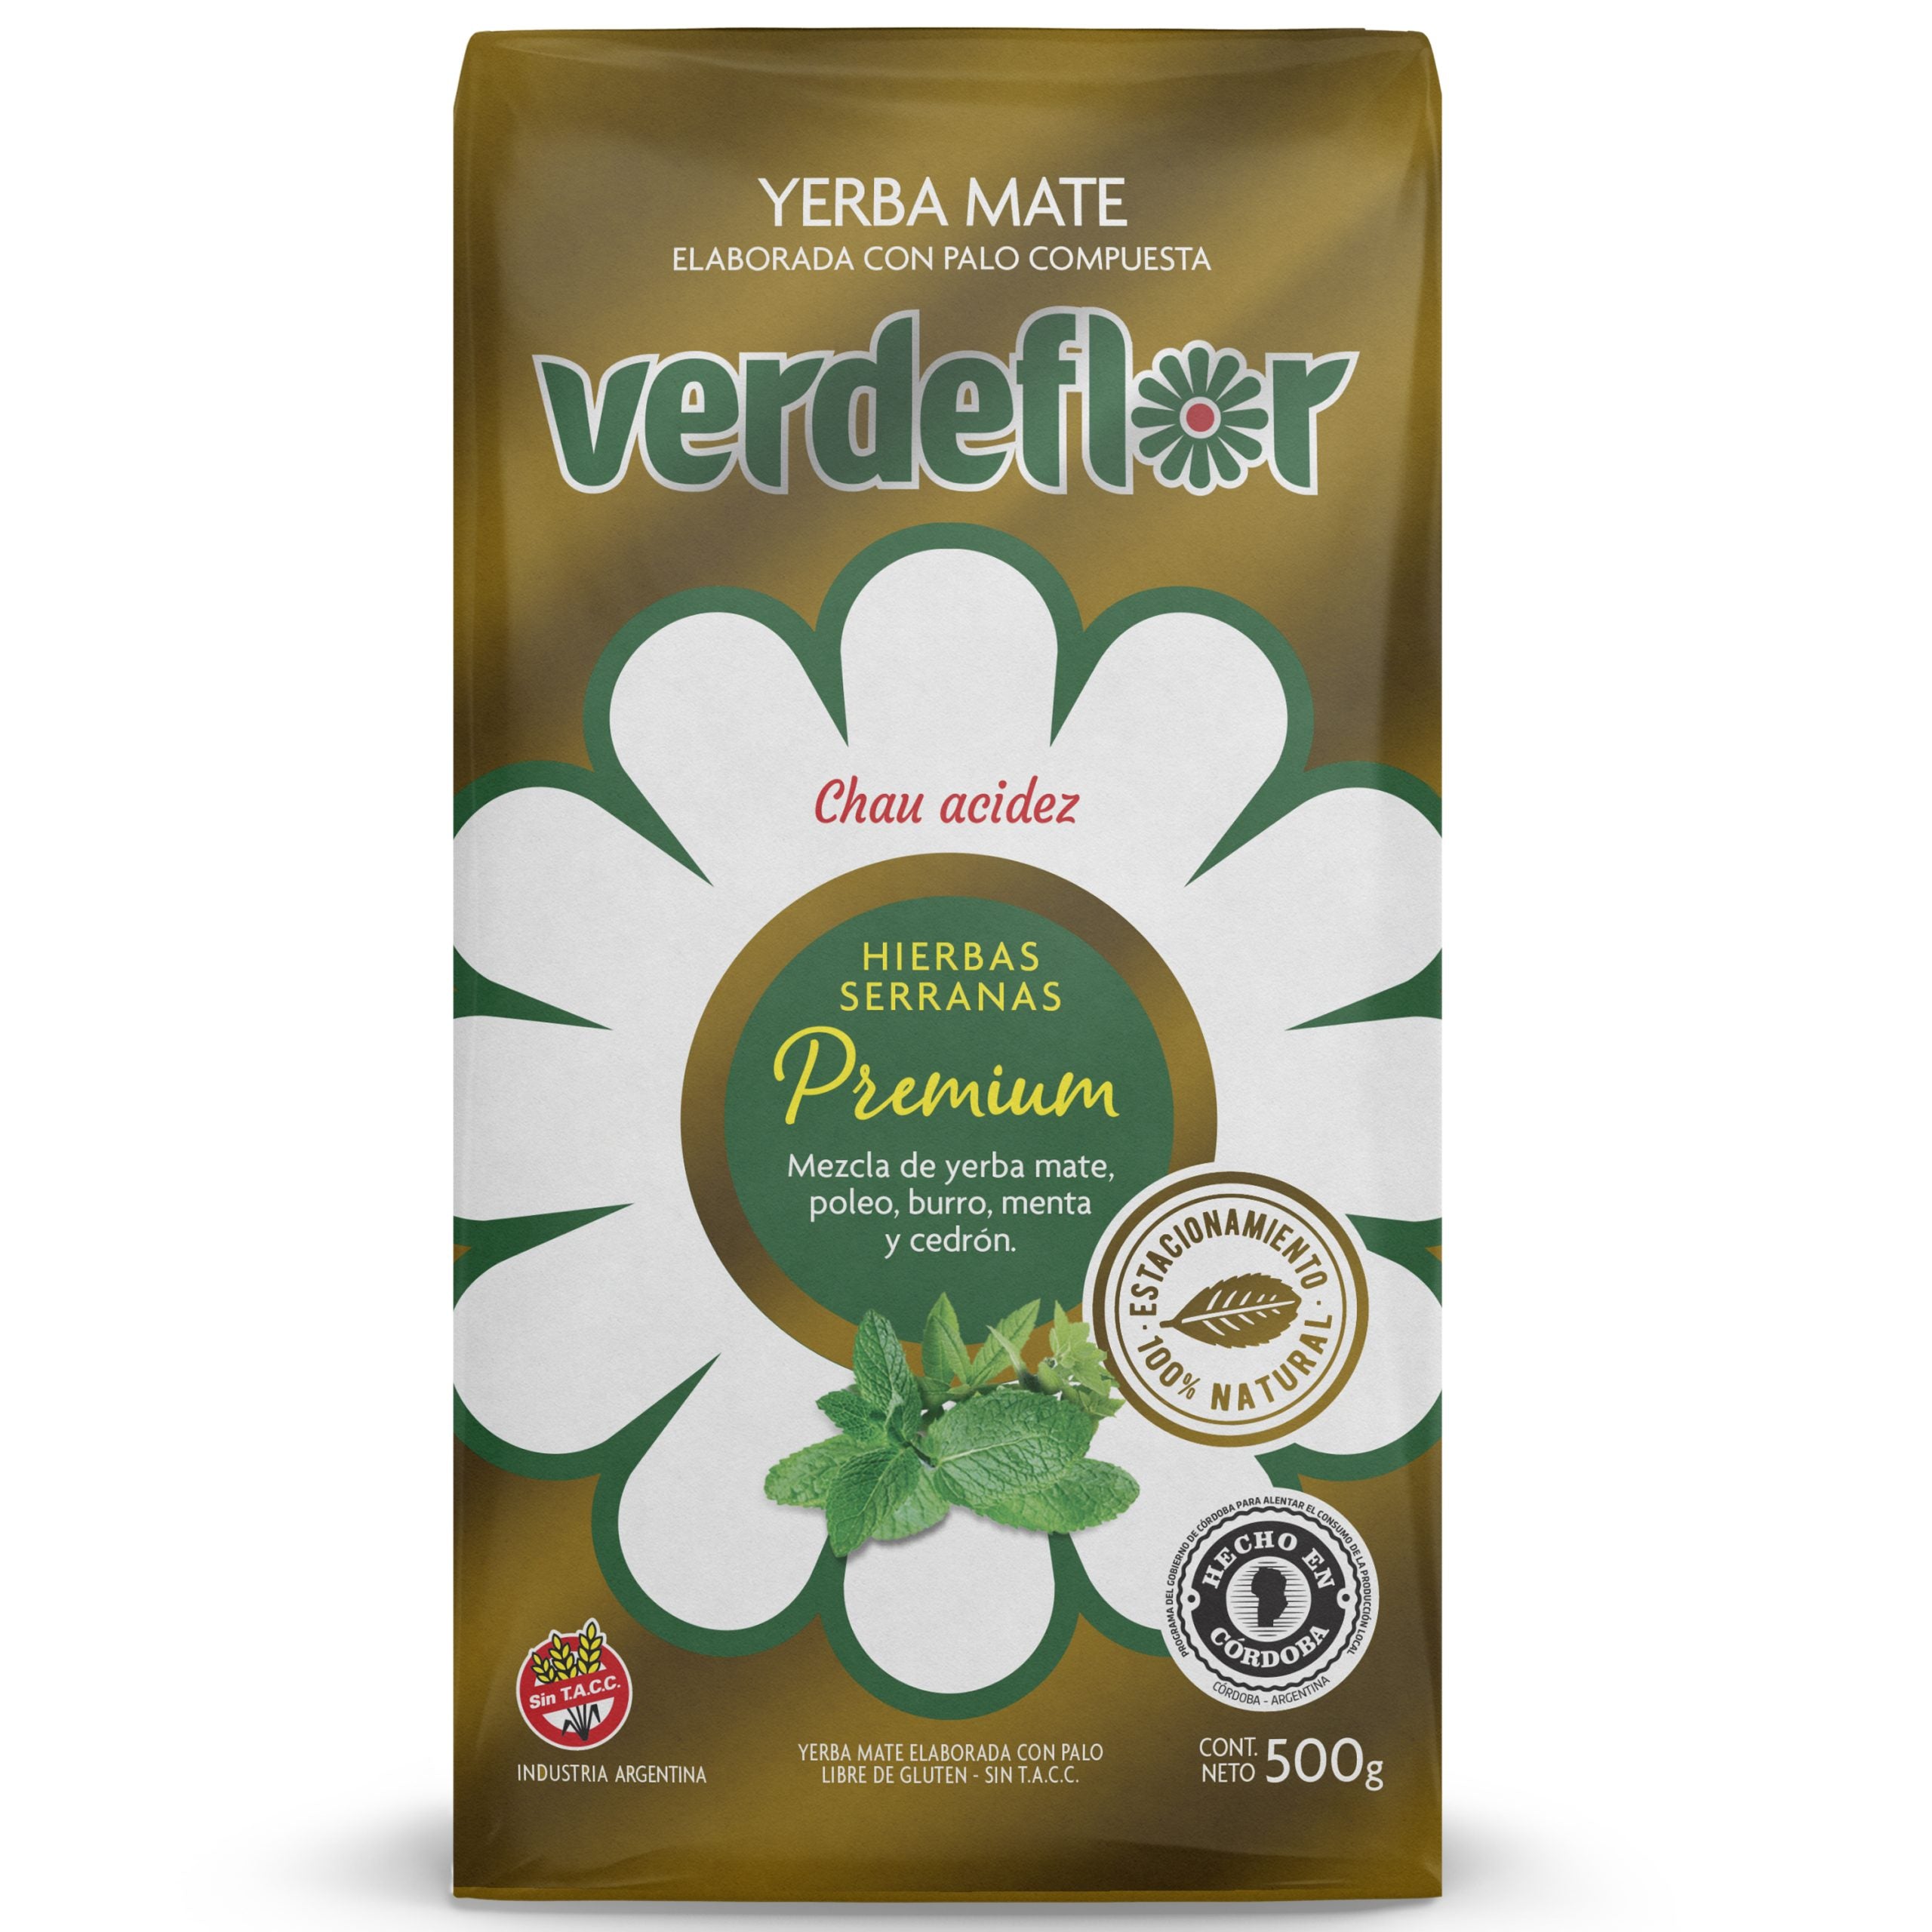 Verdeflor Yerba Mate with Palo and Poleo, Mint and Ginger Flavor